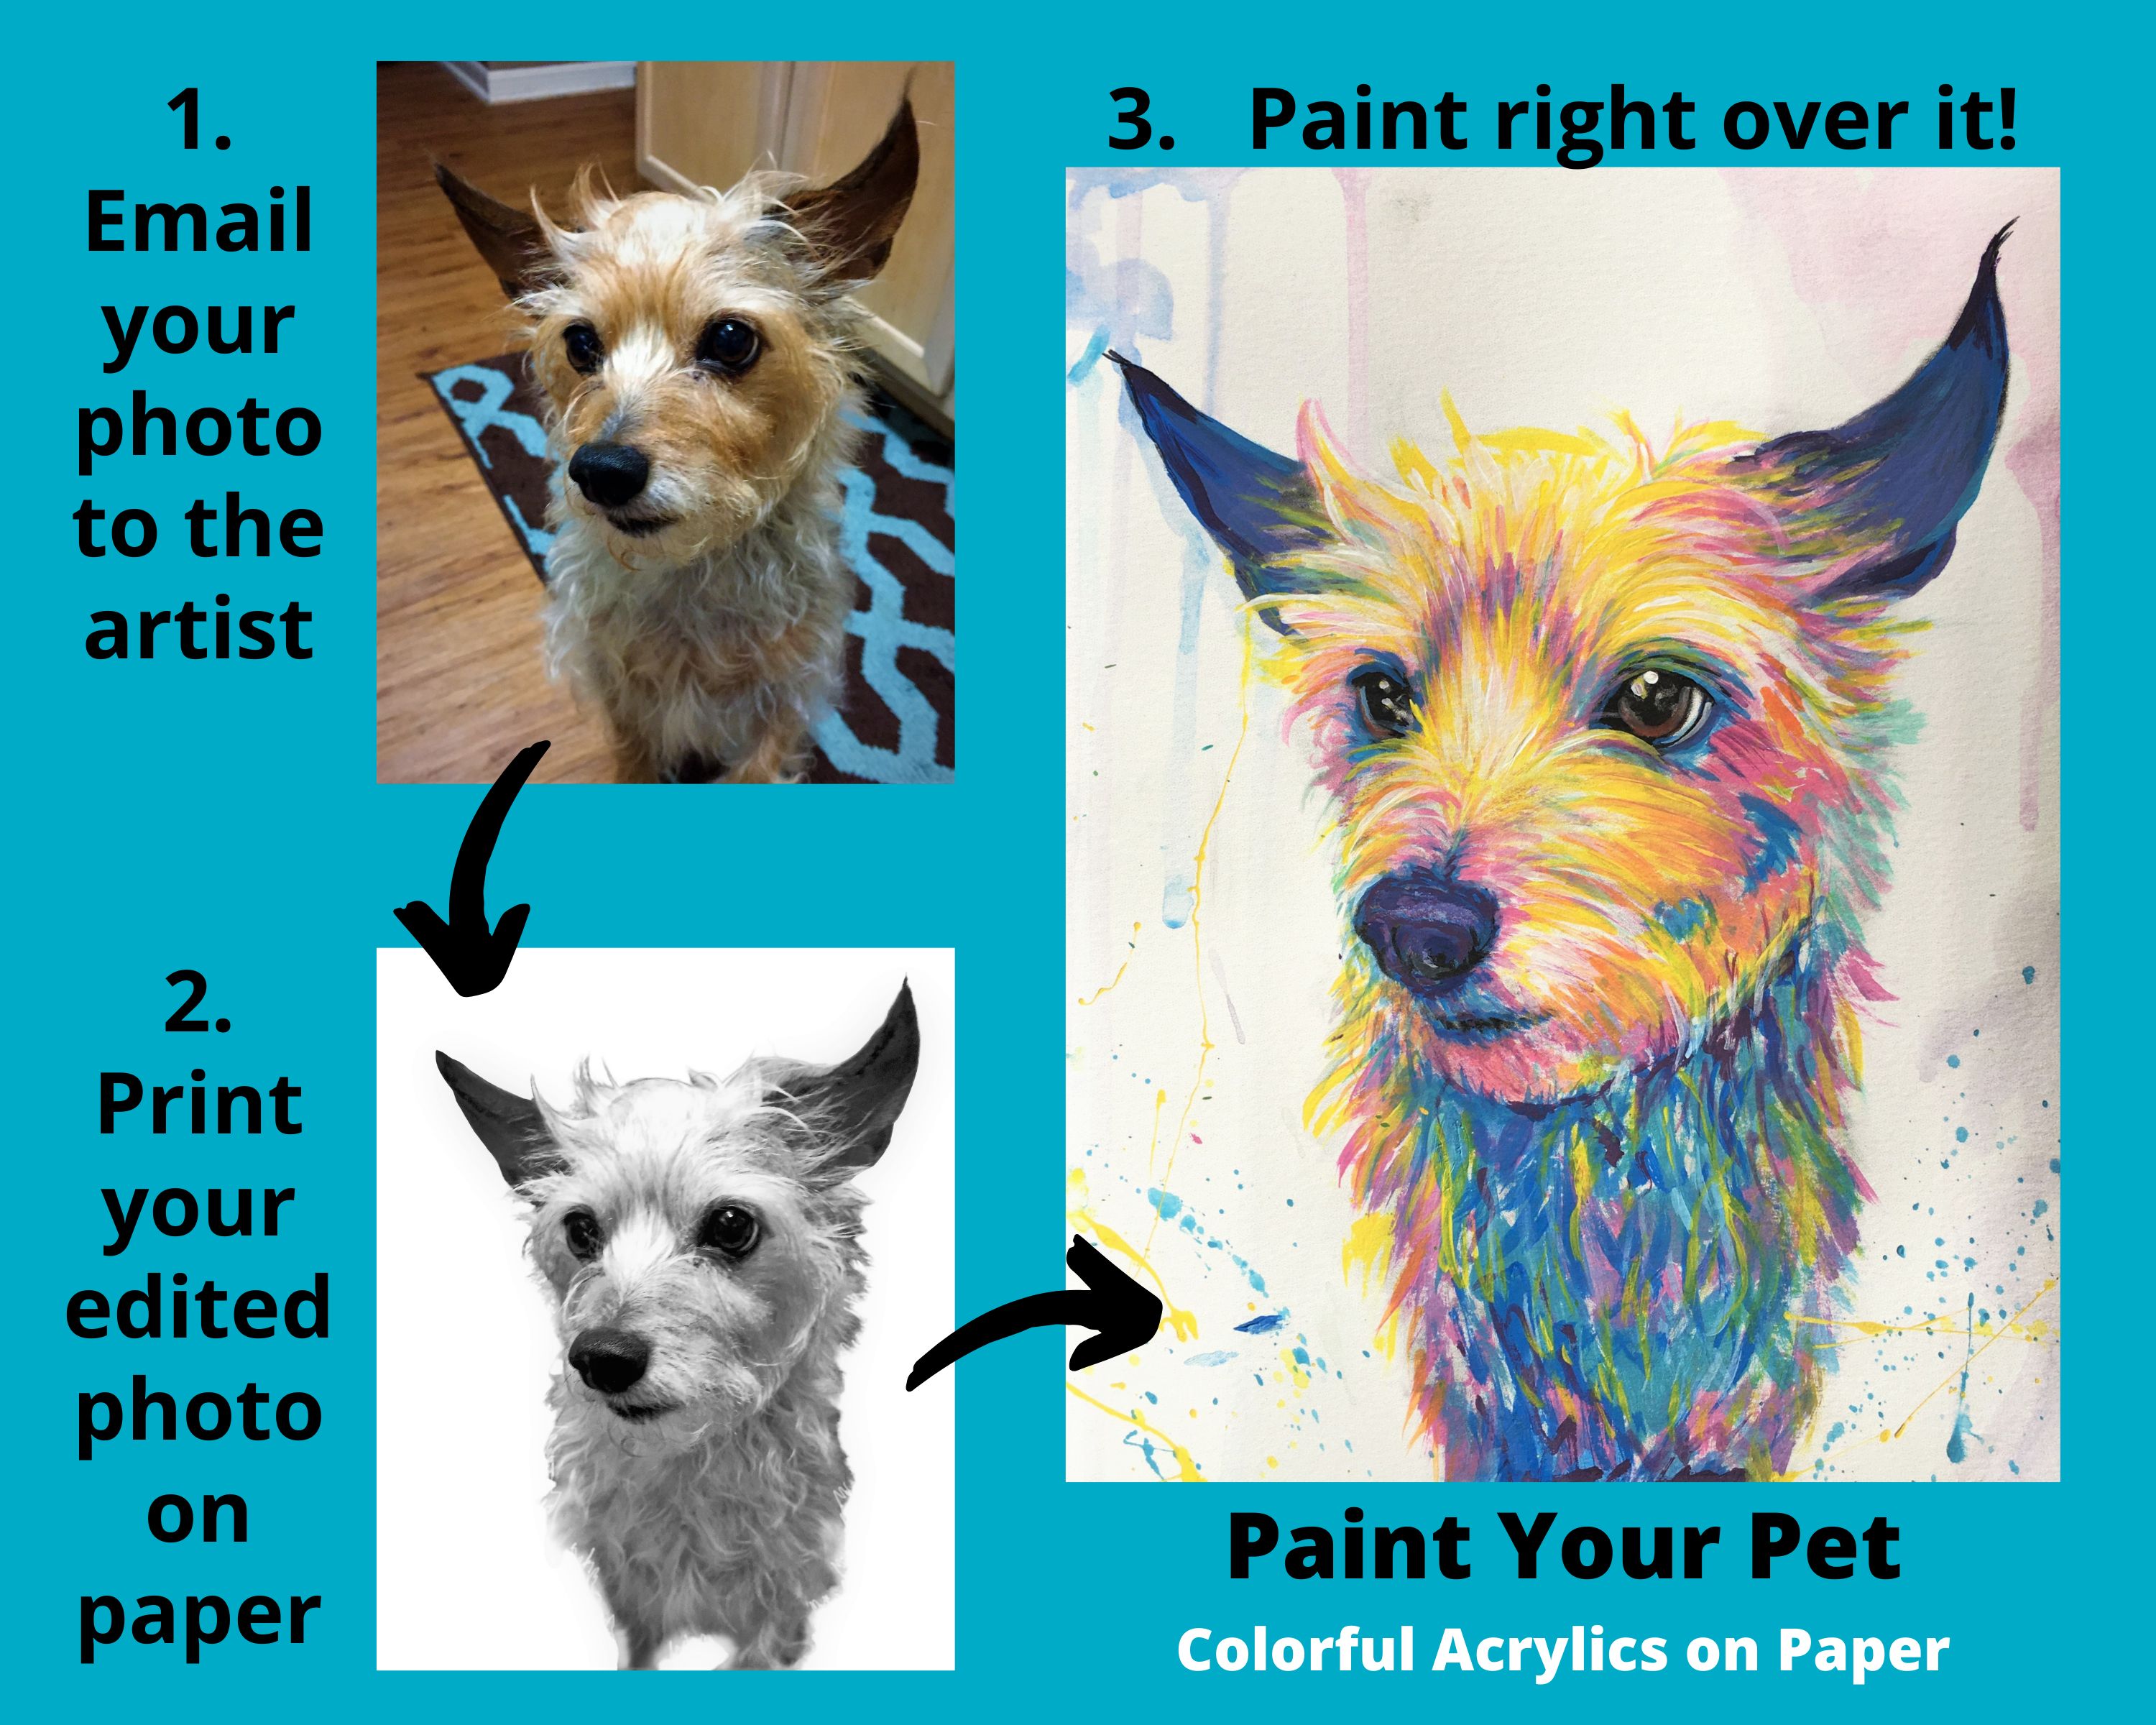 A Paint Your Pet with Colorful Acrylics on Paper experience project by Yaymaker